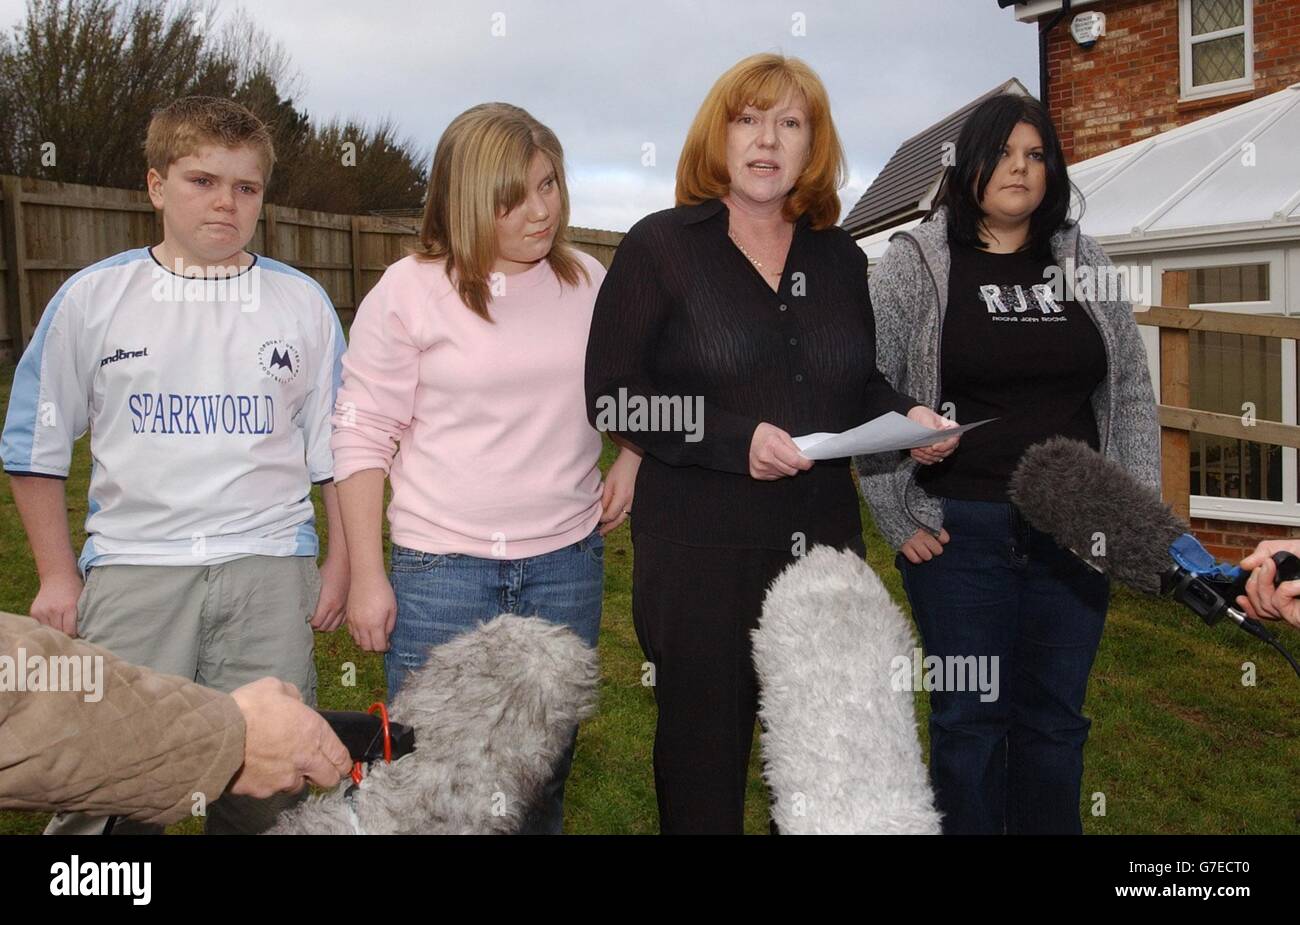 Widow Deborah Martin, wife of train driver Stan Martin, talks with the media in Torquay, Devon as she stands with children James aged 15. Louise 13 and Sian 21 (extreme right - who is Stan's daughter from an earlier marriage). Stan Martin was killed in last week's train accident at Ufton Nervet, Berkshire, when the 1735 London to Plymouth train hit a car on a level crossing. Stock Photo